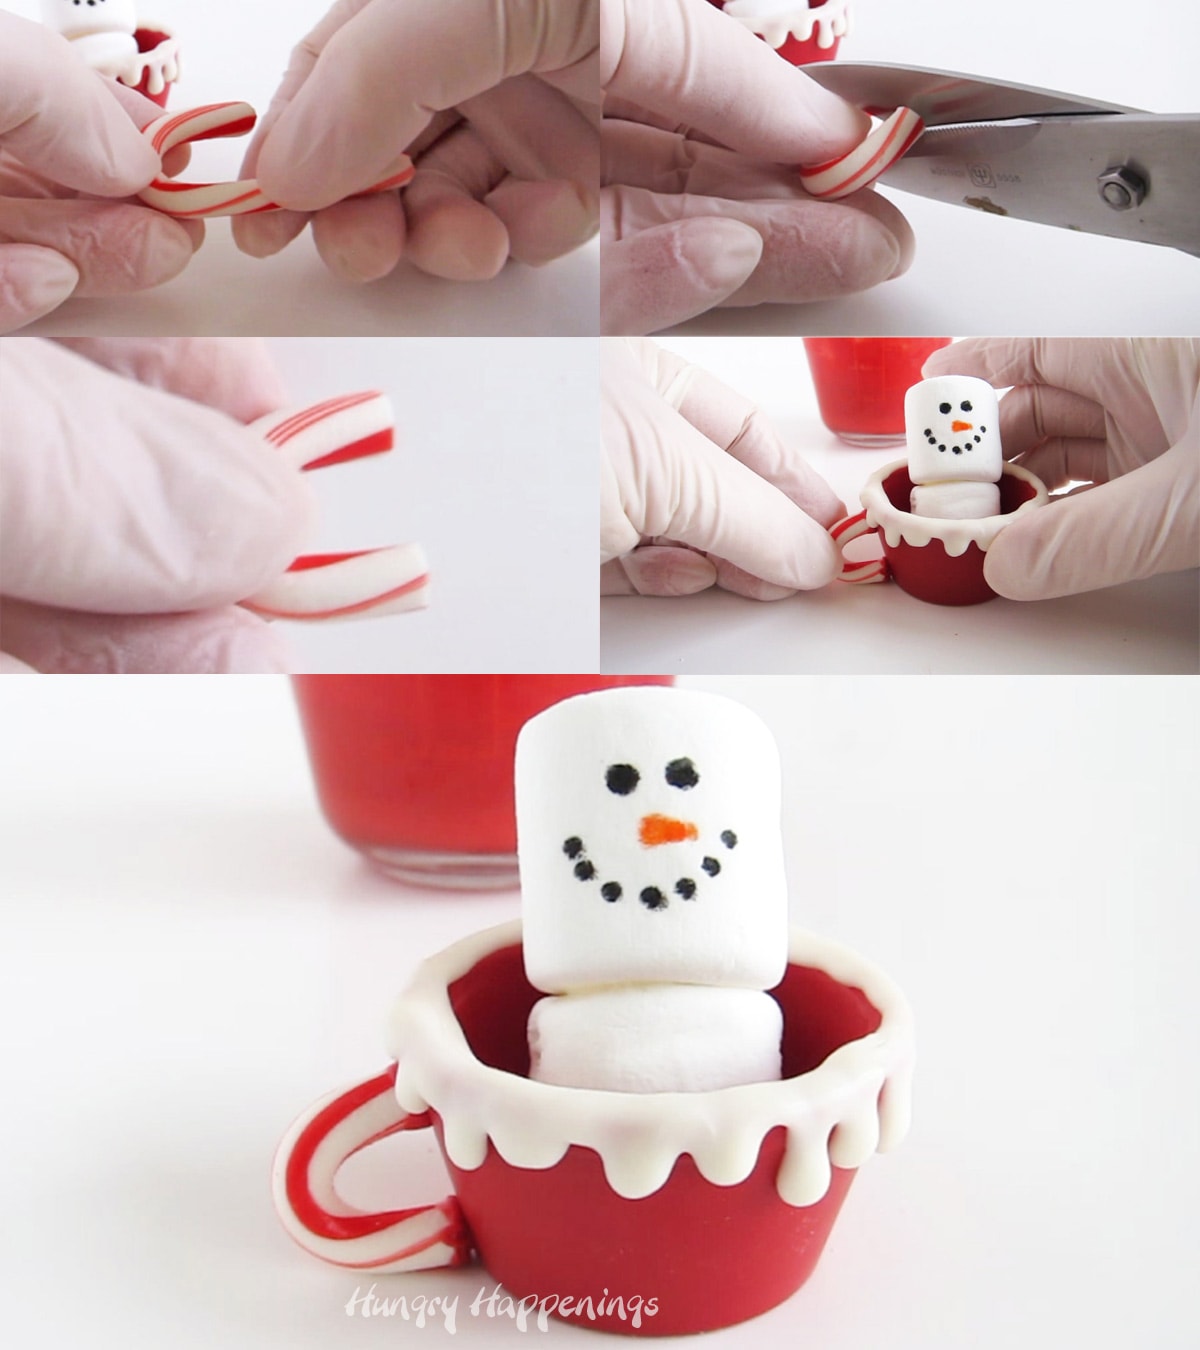 Cut candy canes into handles then attach using melted red candy melts.